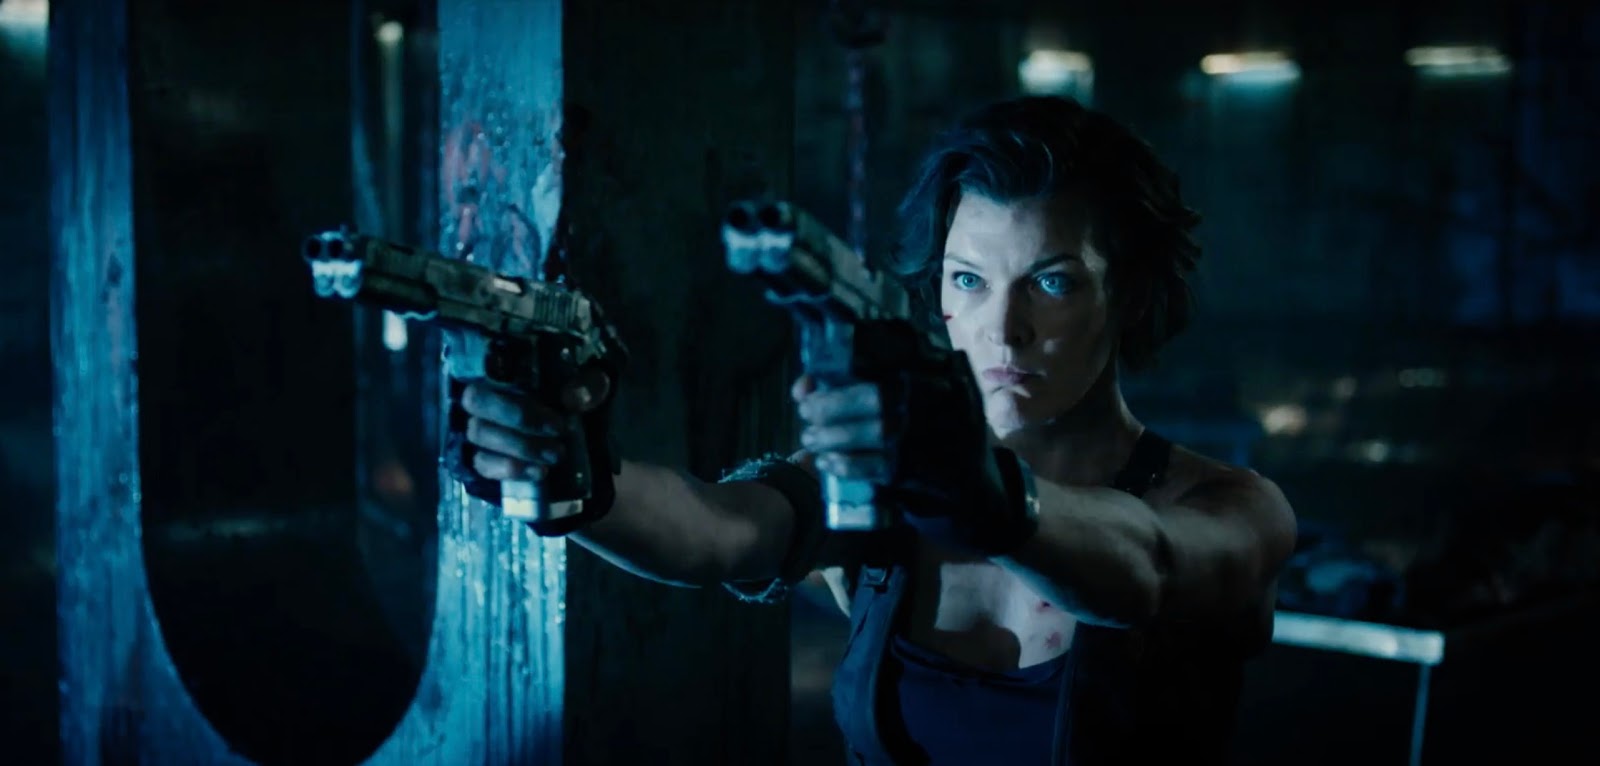 Kephn's Mad Scrawlings: Resident Evil: The Final Chapter Review